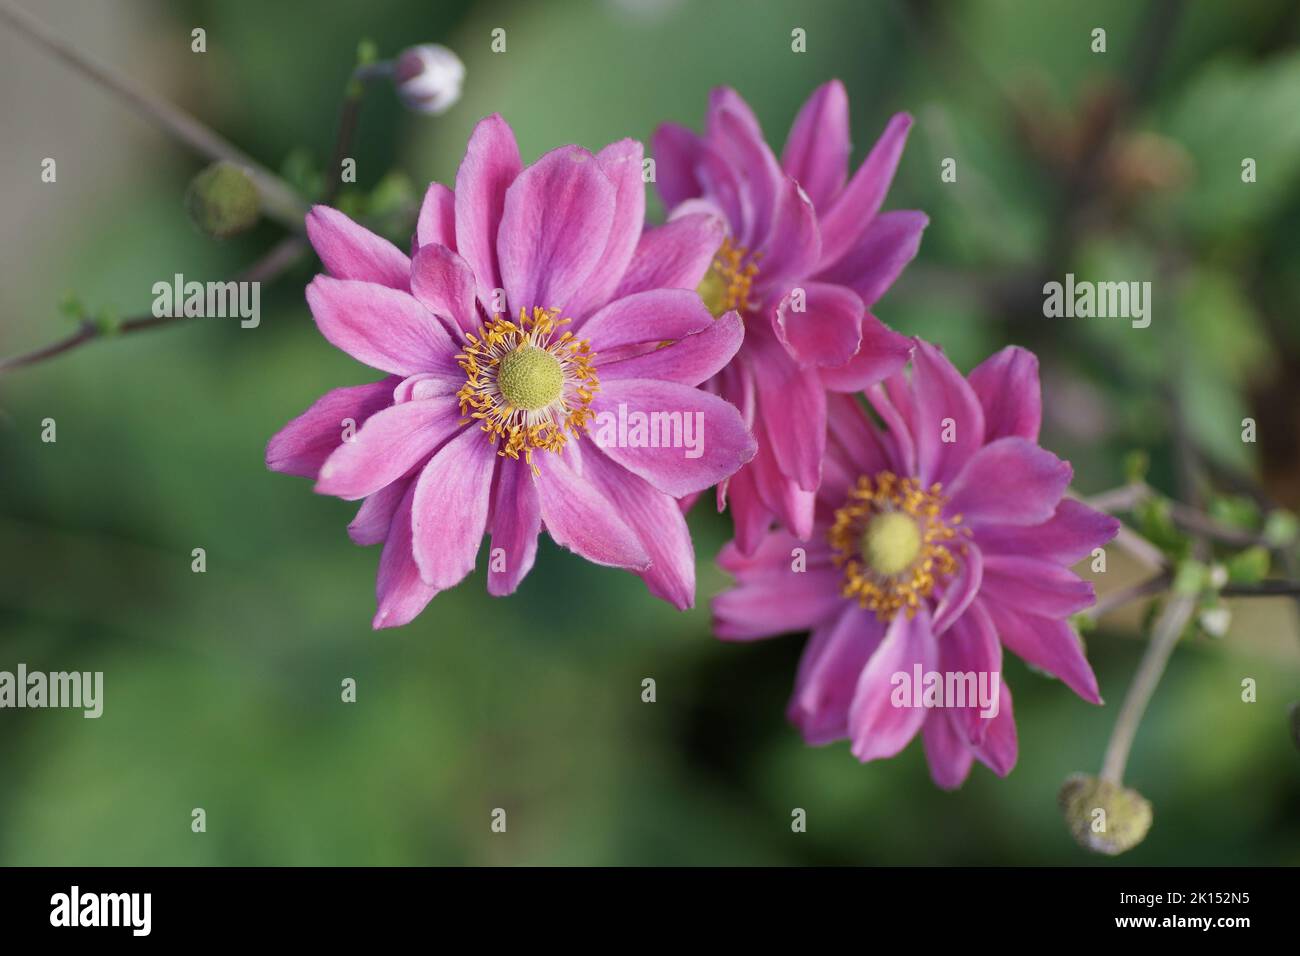 The pink flowers of the herbaceous perennial Anemone x hybrida 'Pamina' Stock Photo